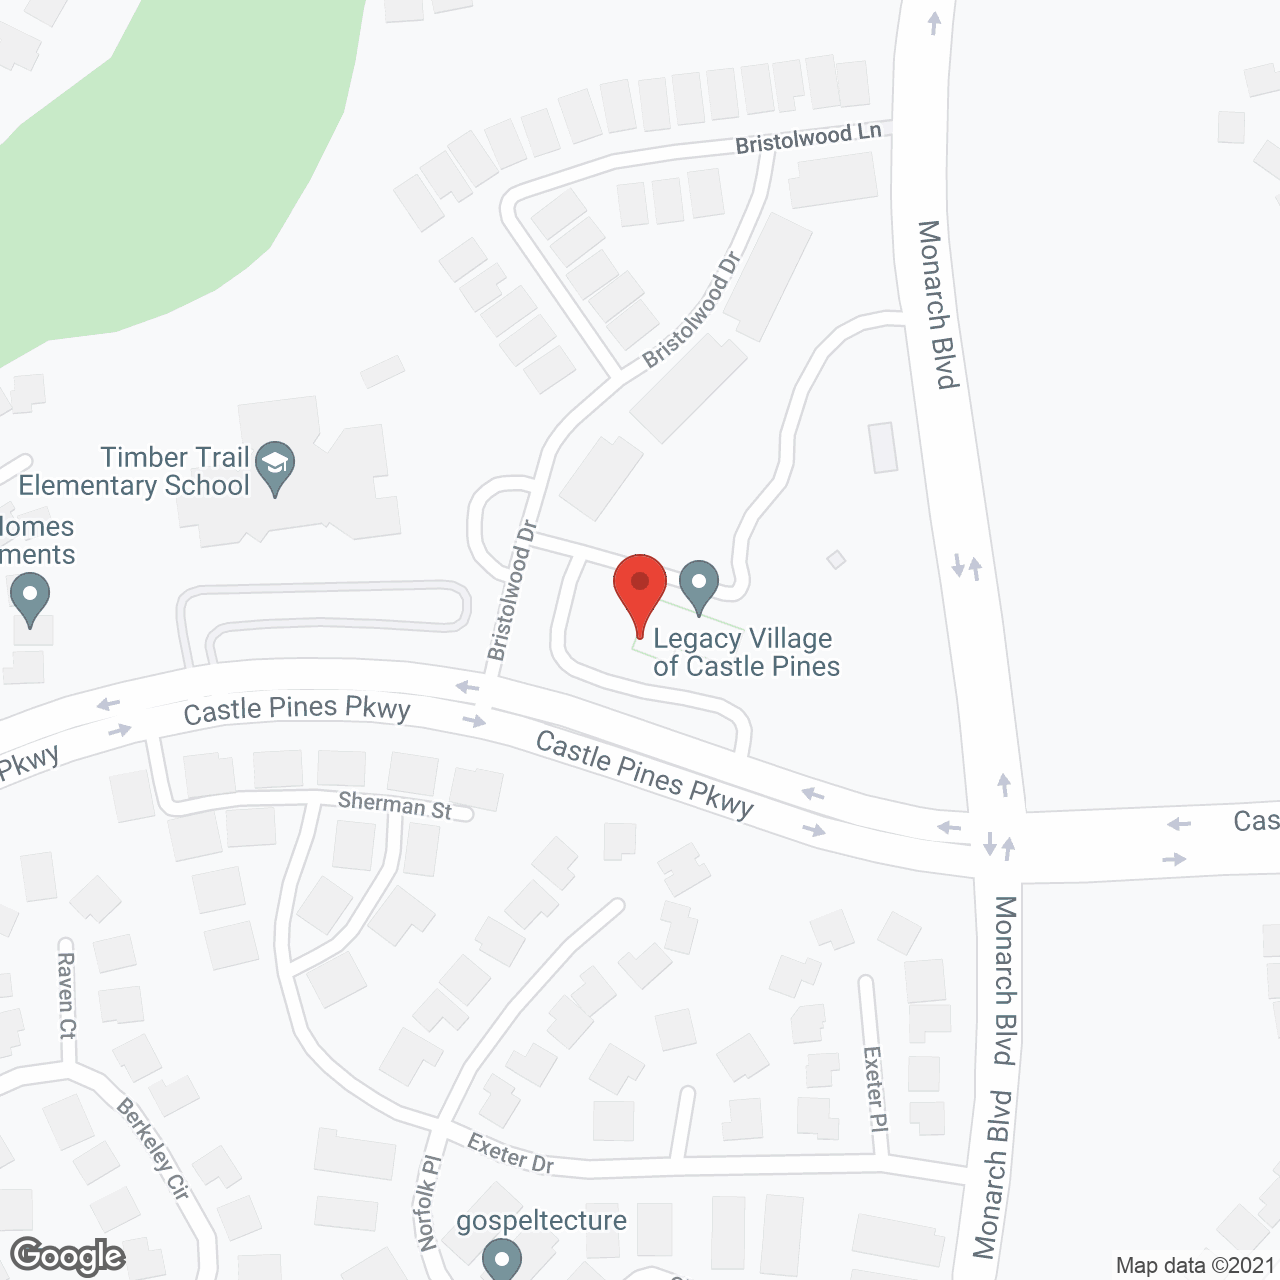 Legacy Village of Castle Pines in google map